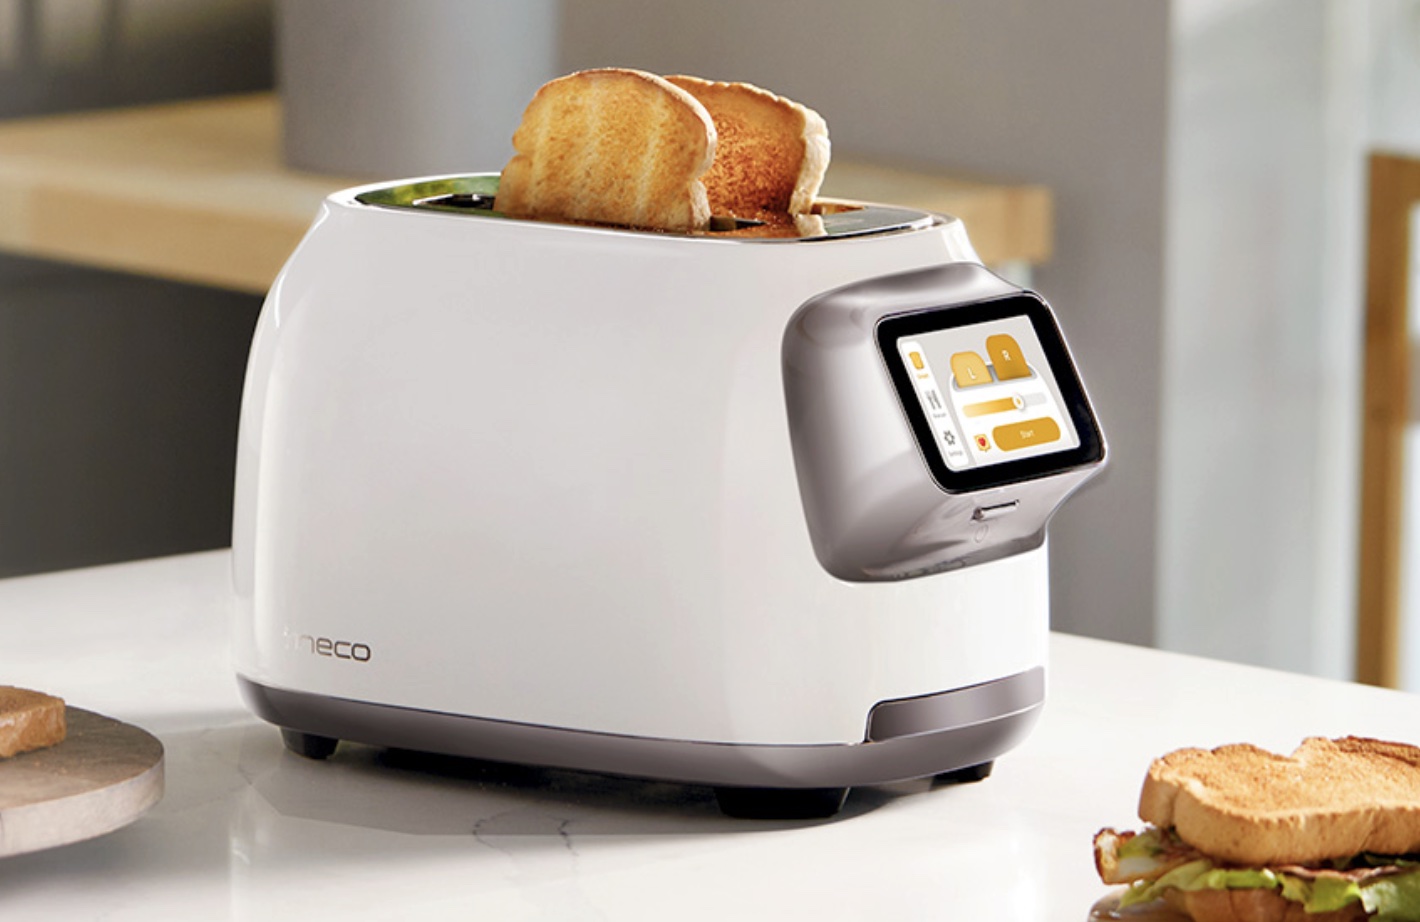 https://www.digitaltrends.com/wp-content/uploads/2022/11/Tineco-Toasty-One-smart-toaster.jpg?p=1